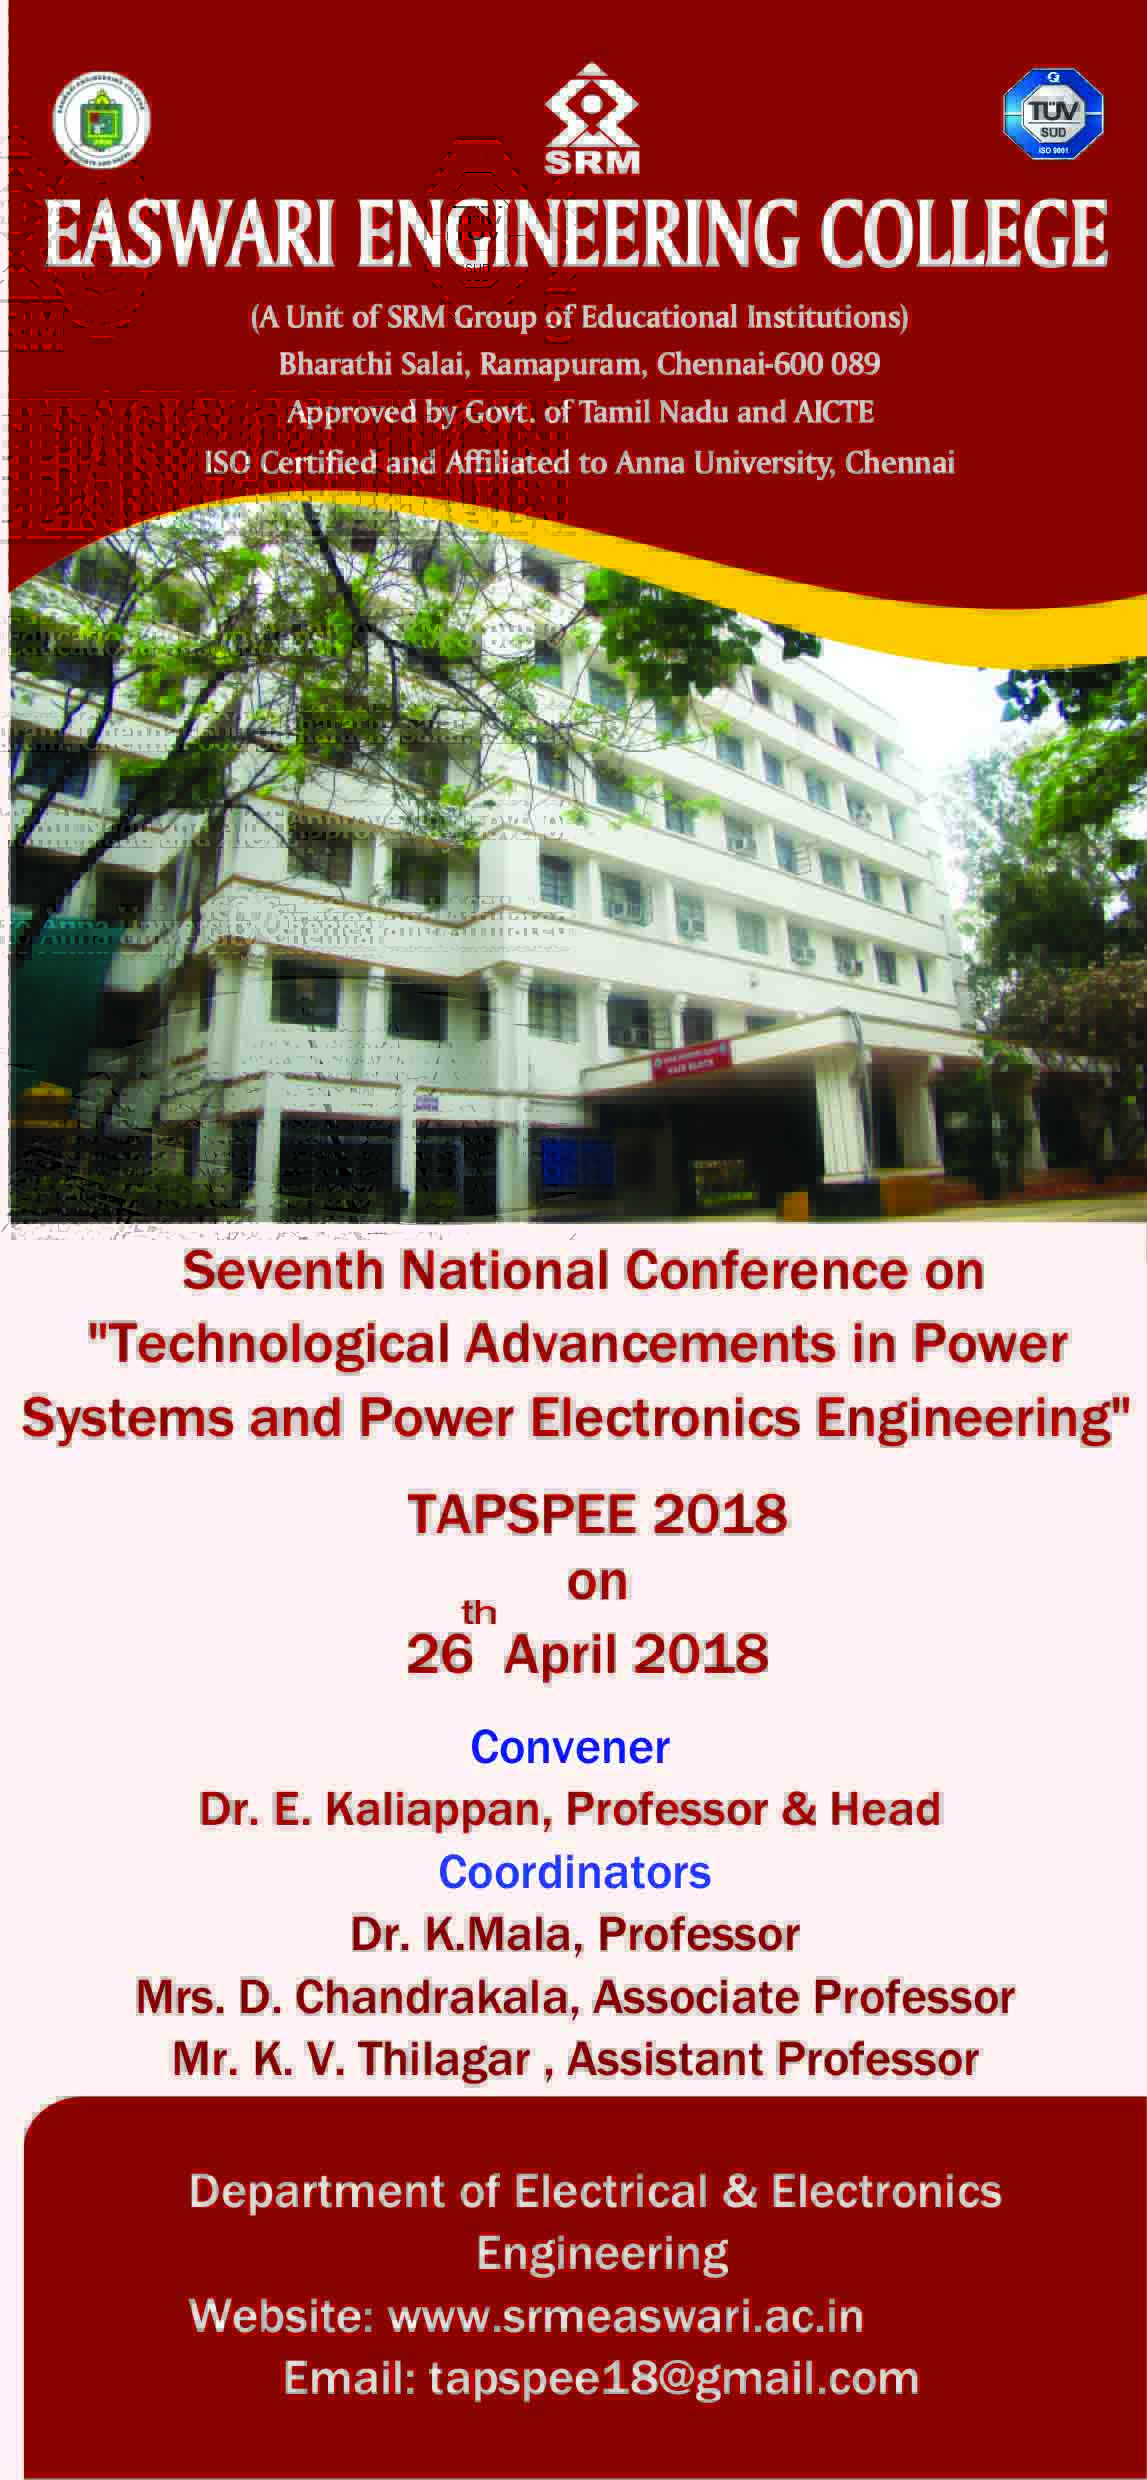 Seventh National Conference on Technological advancements in Power Systems and Power Electronics Engineering TAPSPEE 2018